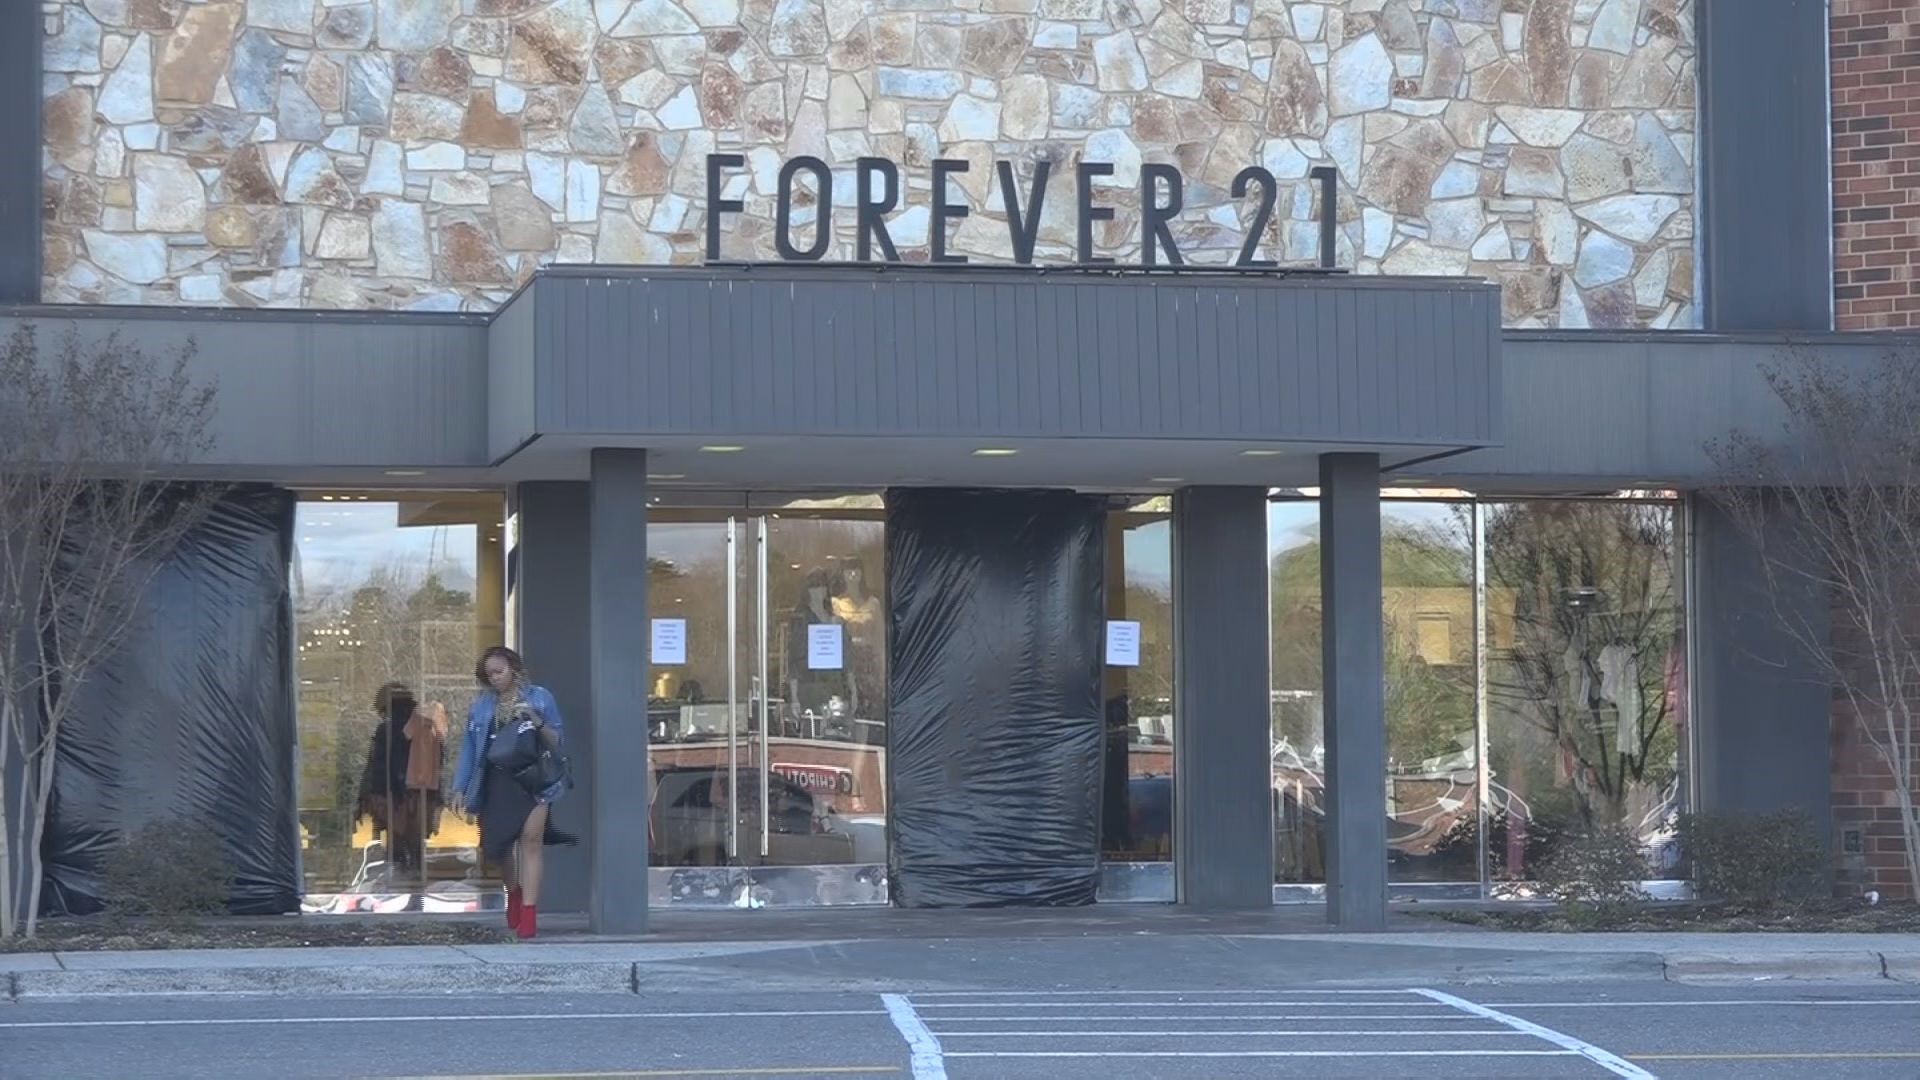 18-Year-Old, Isaac Banos-Salazar is now in custody following the shooting outside of Forever 21.